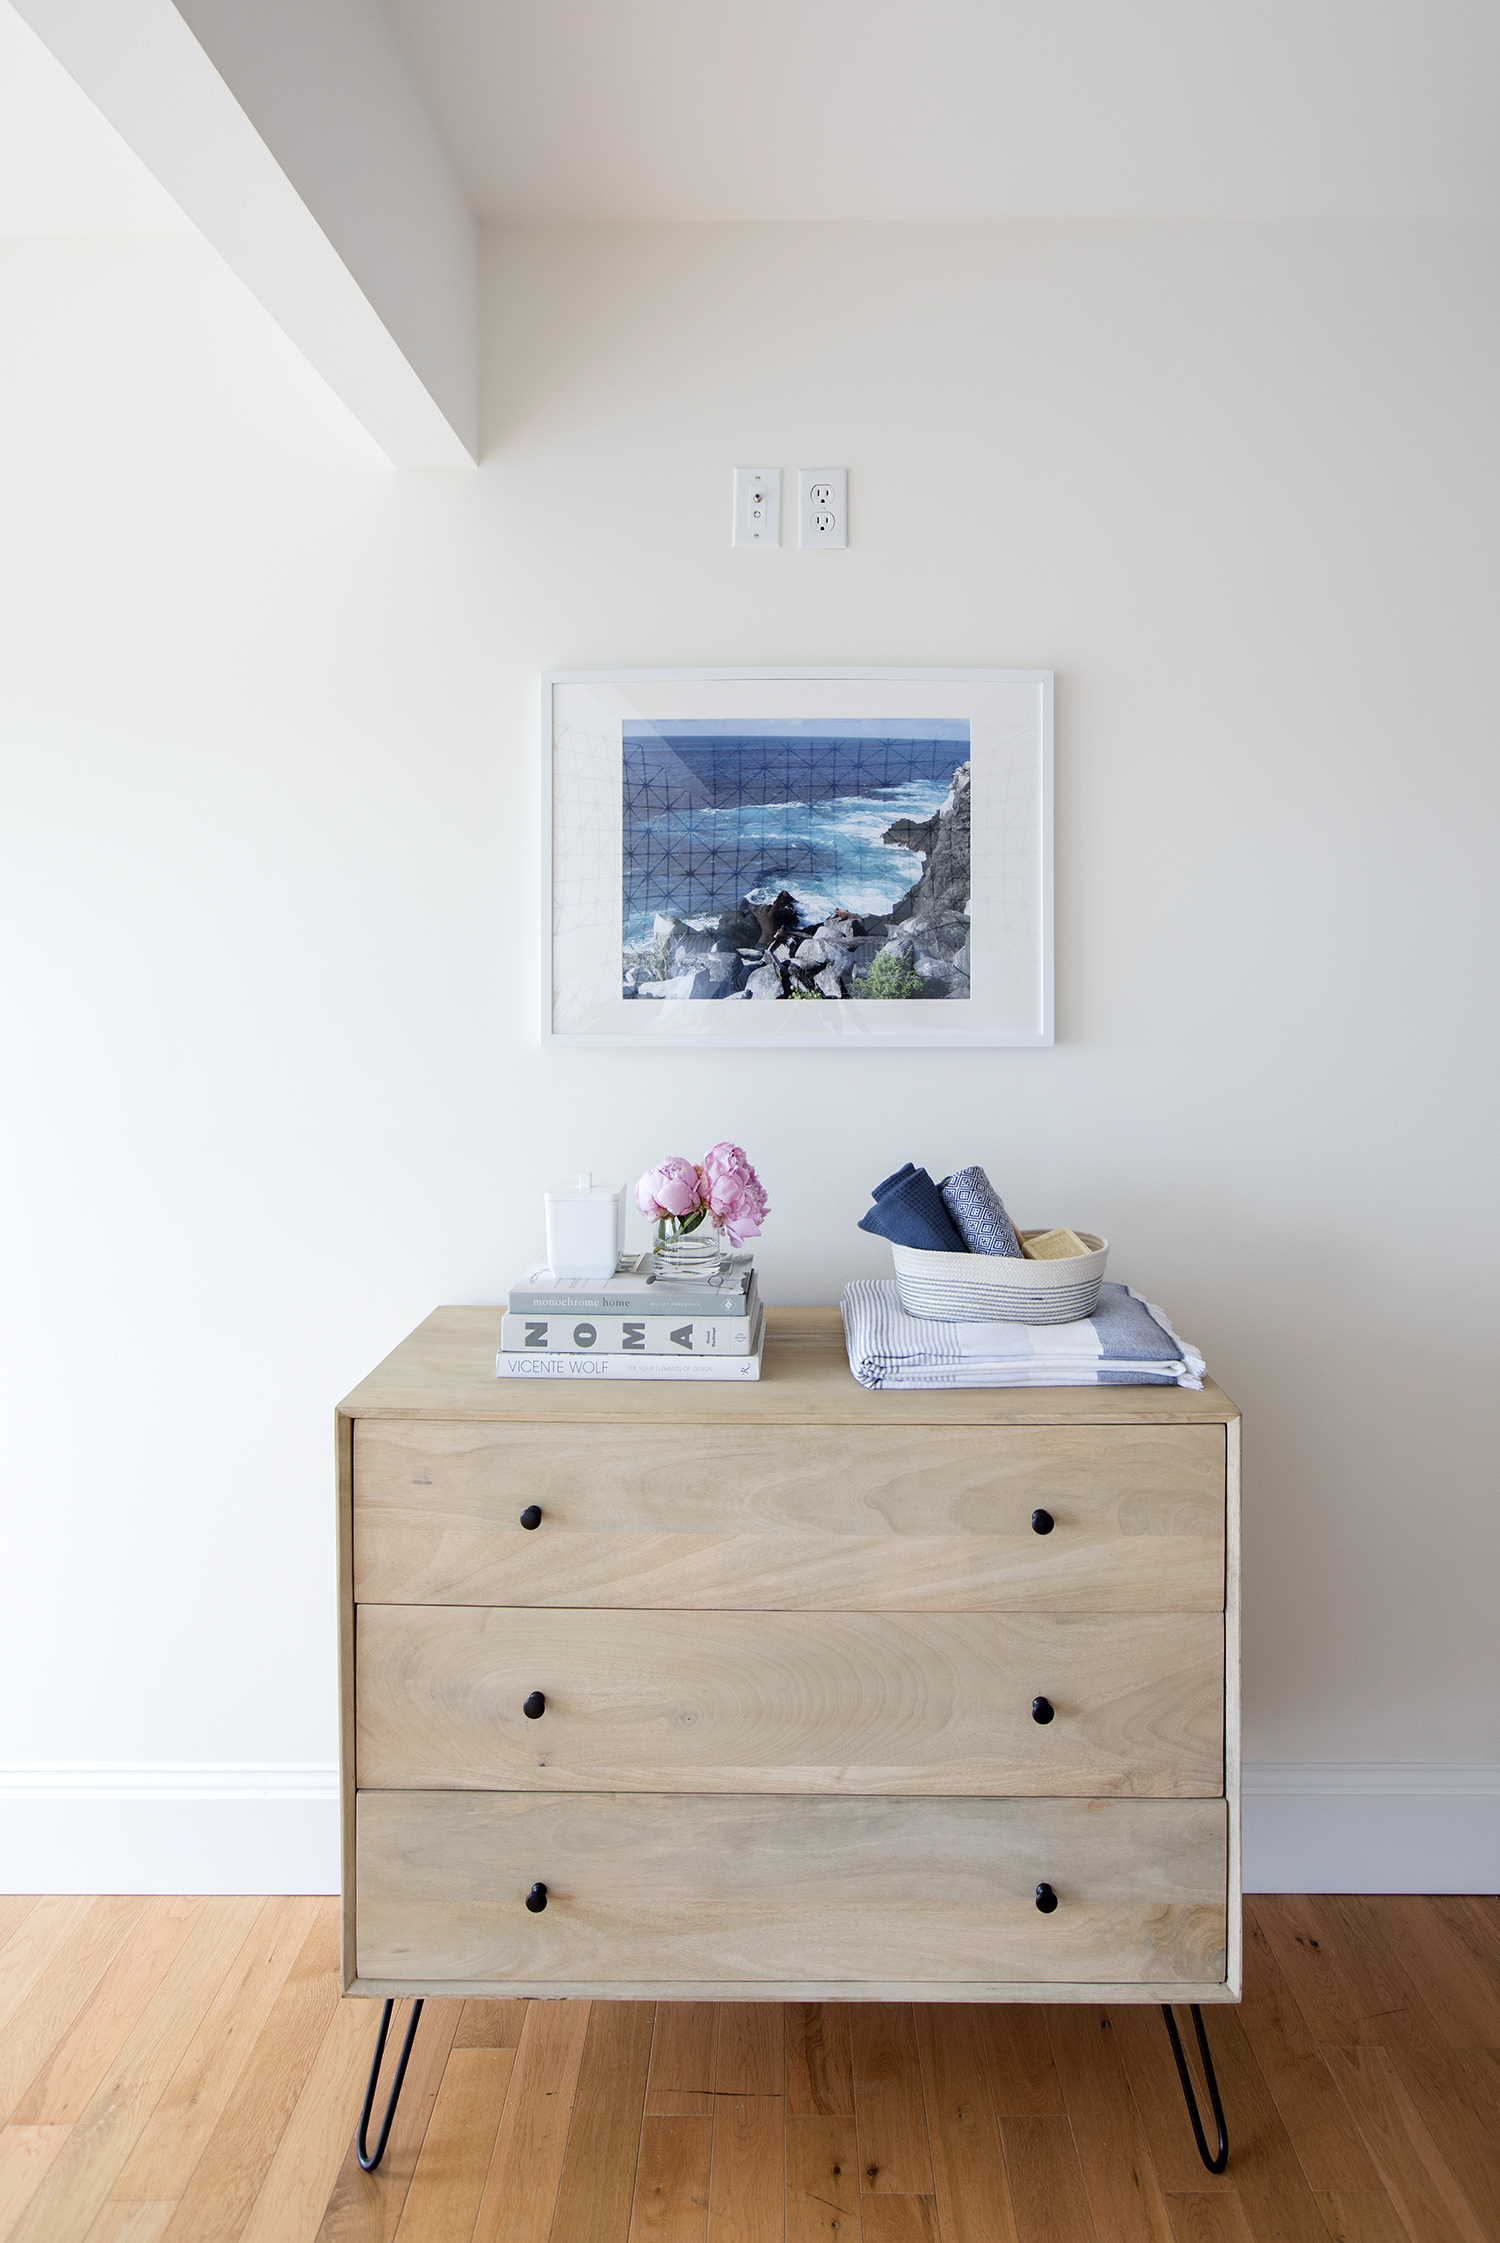 A rustic dresser with hairpin legs provides clothing storage as well as a surface to display artwork.